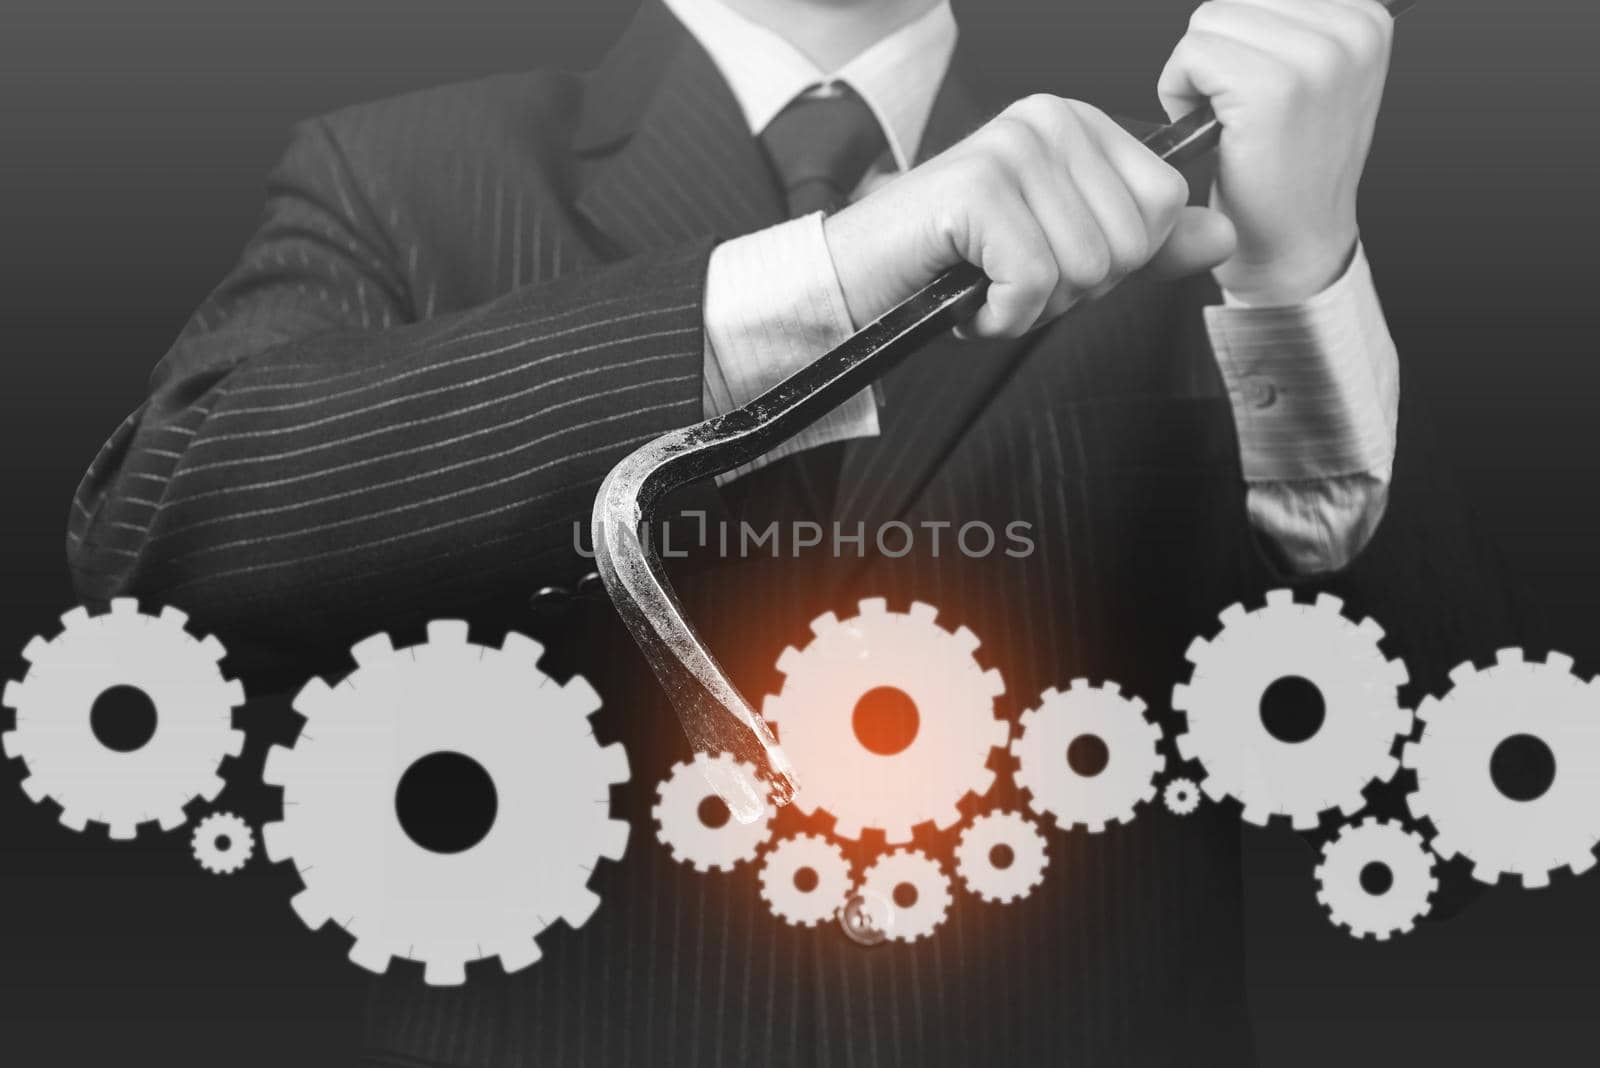 usinessman in a suit holds metal crowbar with cogwheels, concept of business creation, monochrome image